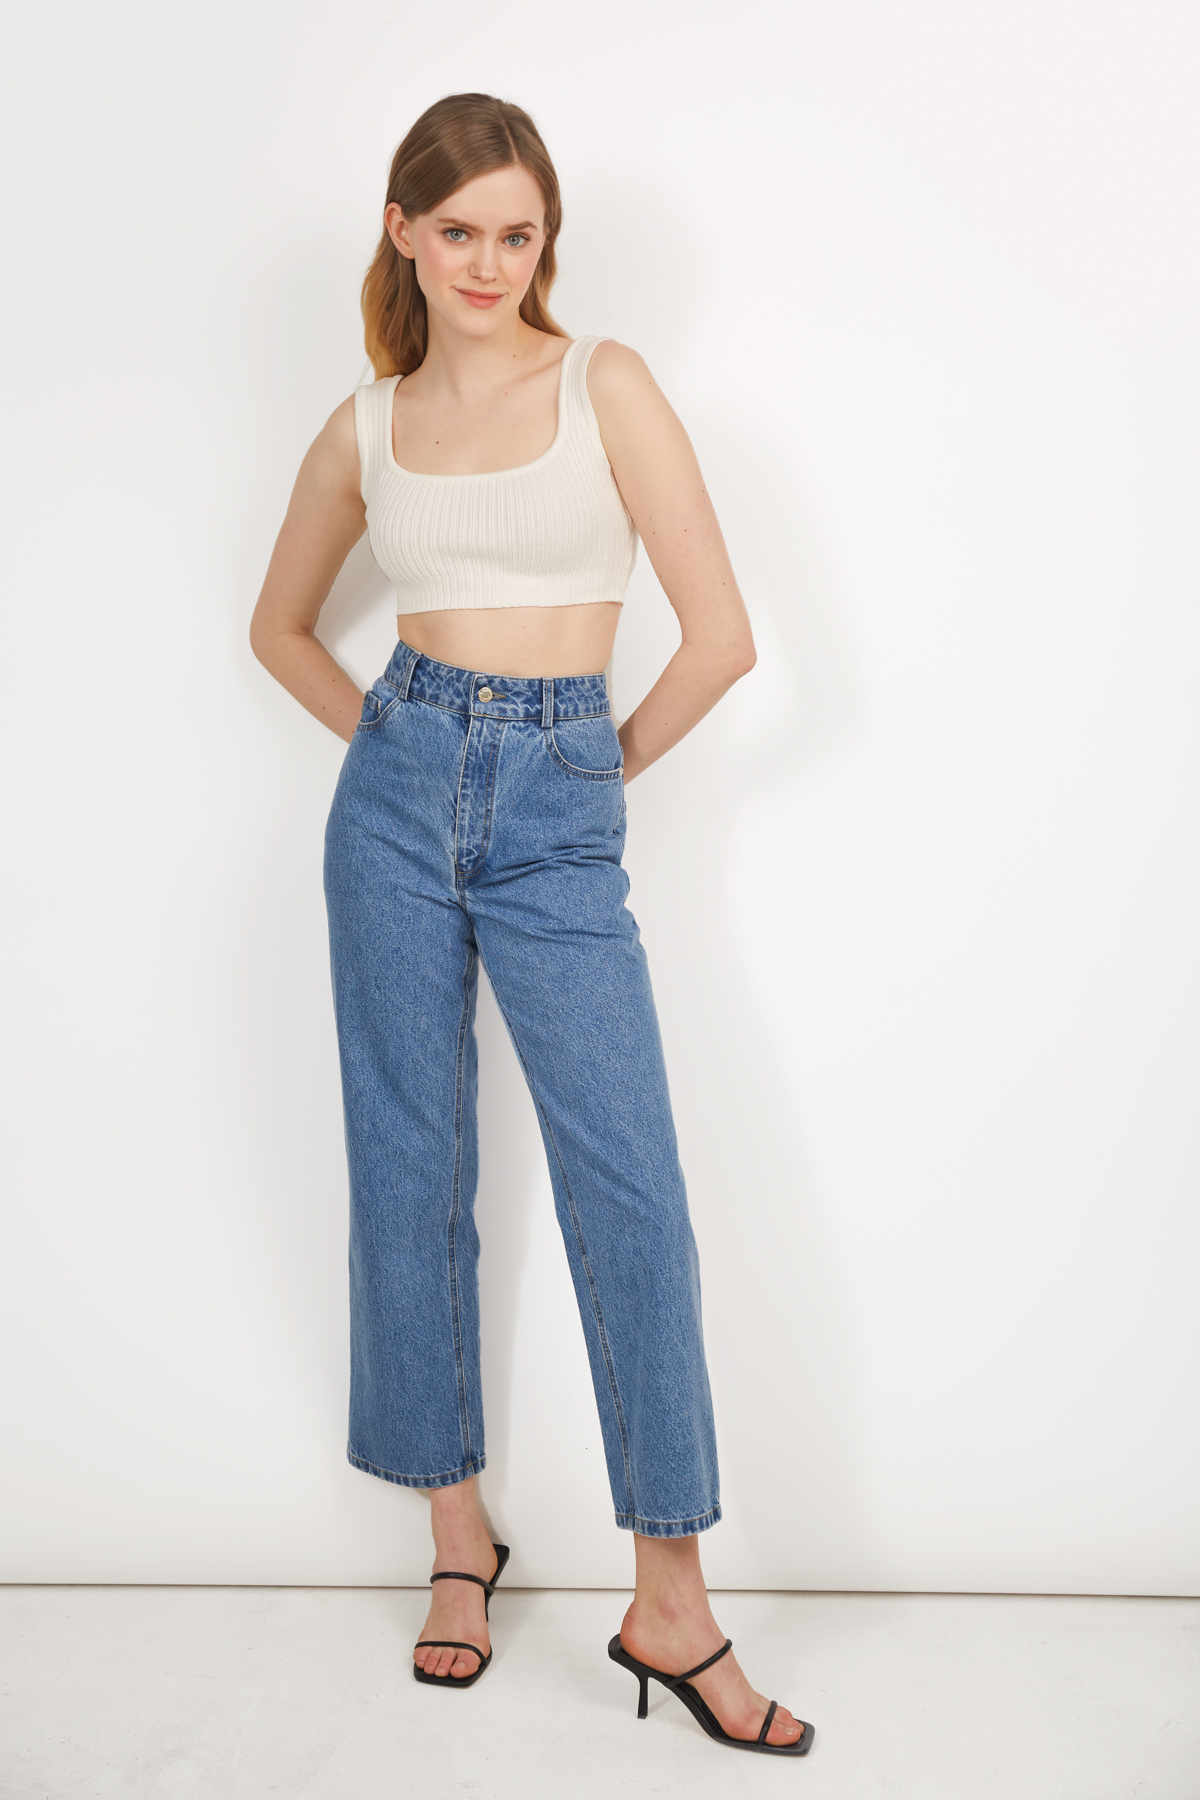 Milky white knitted crop top, photo 2